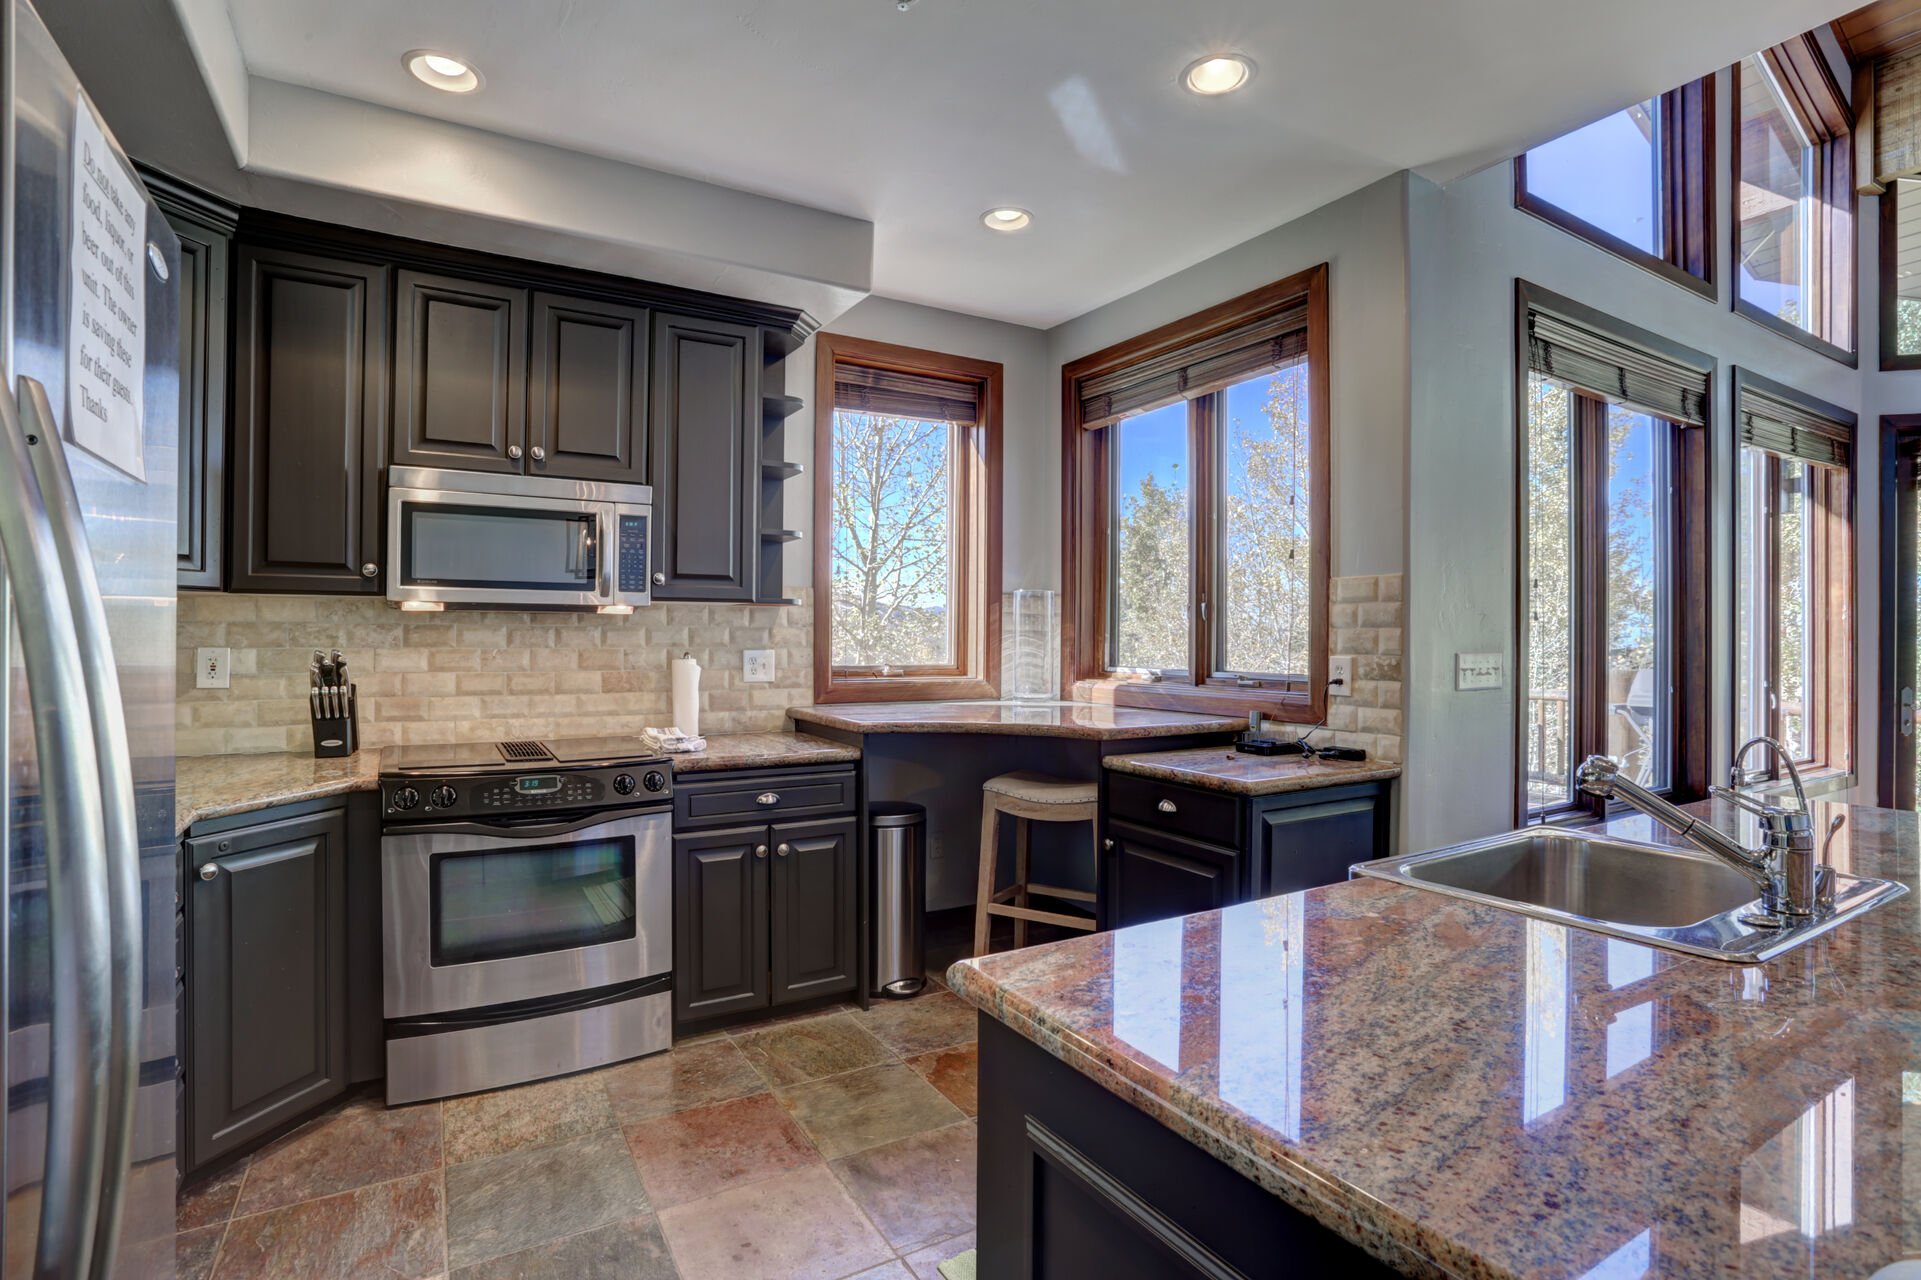 Fully Equipped Gourmet Kitchen with Granite Counters, Stainless Steel Appliances